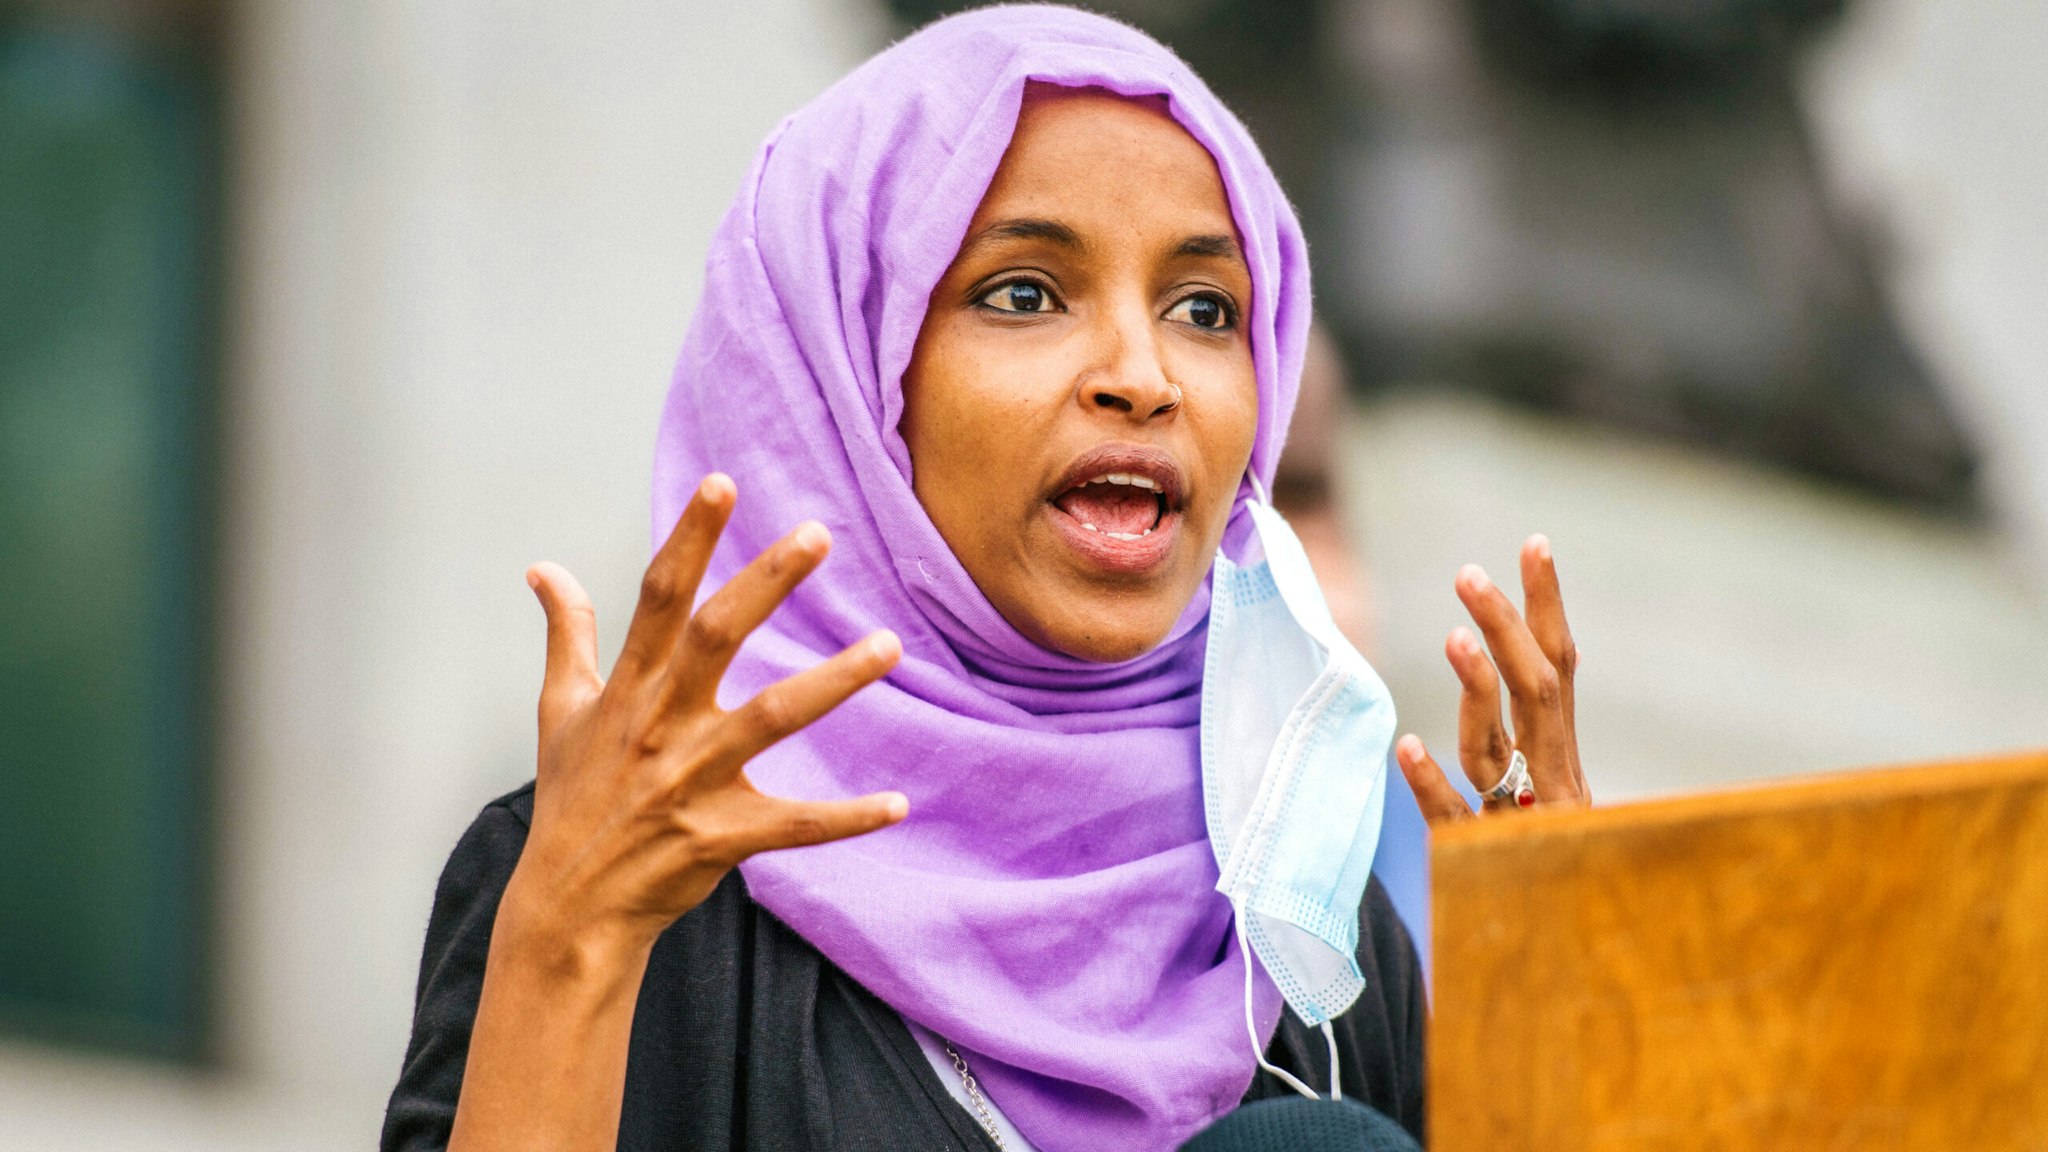 U.S. Rep. Ihan Omar (D-MN) speaks during a press conference on July 7, 2020 in St. Paul, Minnesota. A press conference was held by the Minnesota People of Color and Indigenous caucus to discuss work on the state and federal level to make systematic changes to address institutional racism.